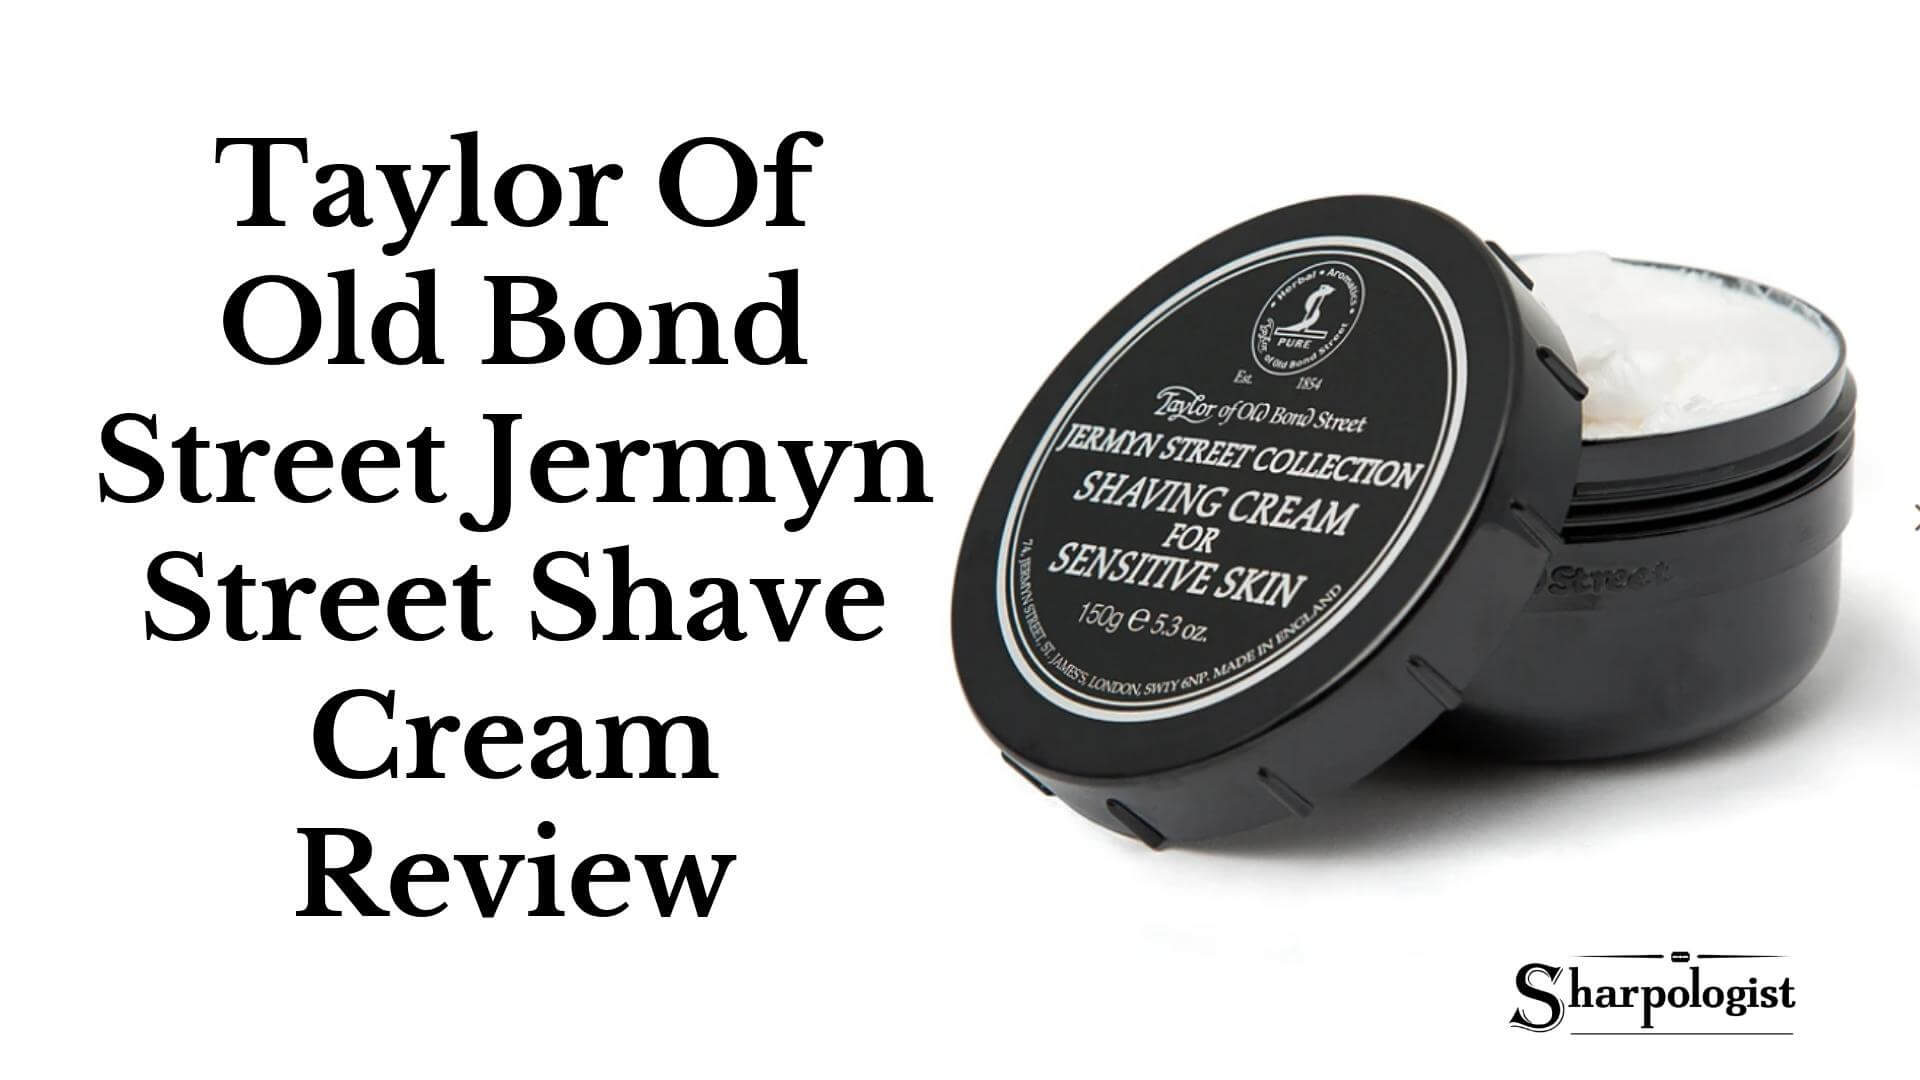 Taylor Of Old Bond Street Jermyn Street Shave Cream Review